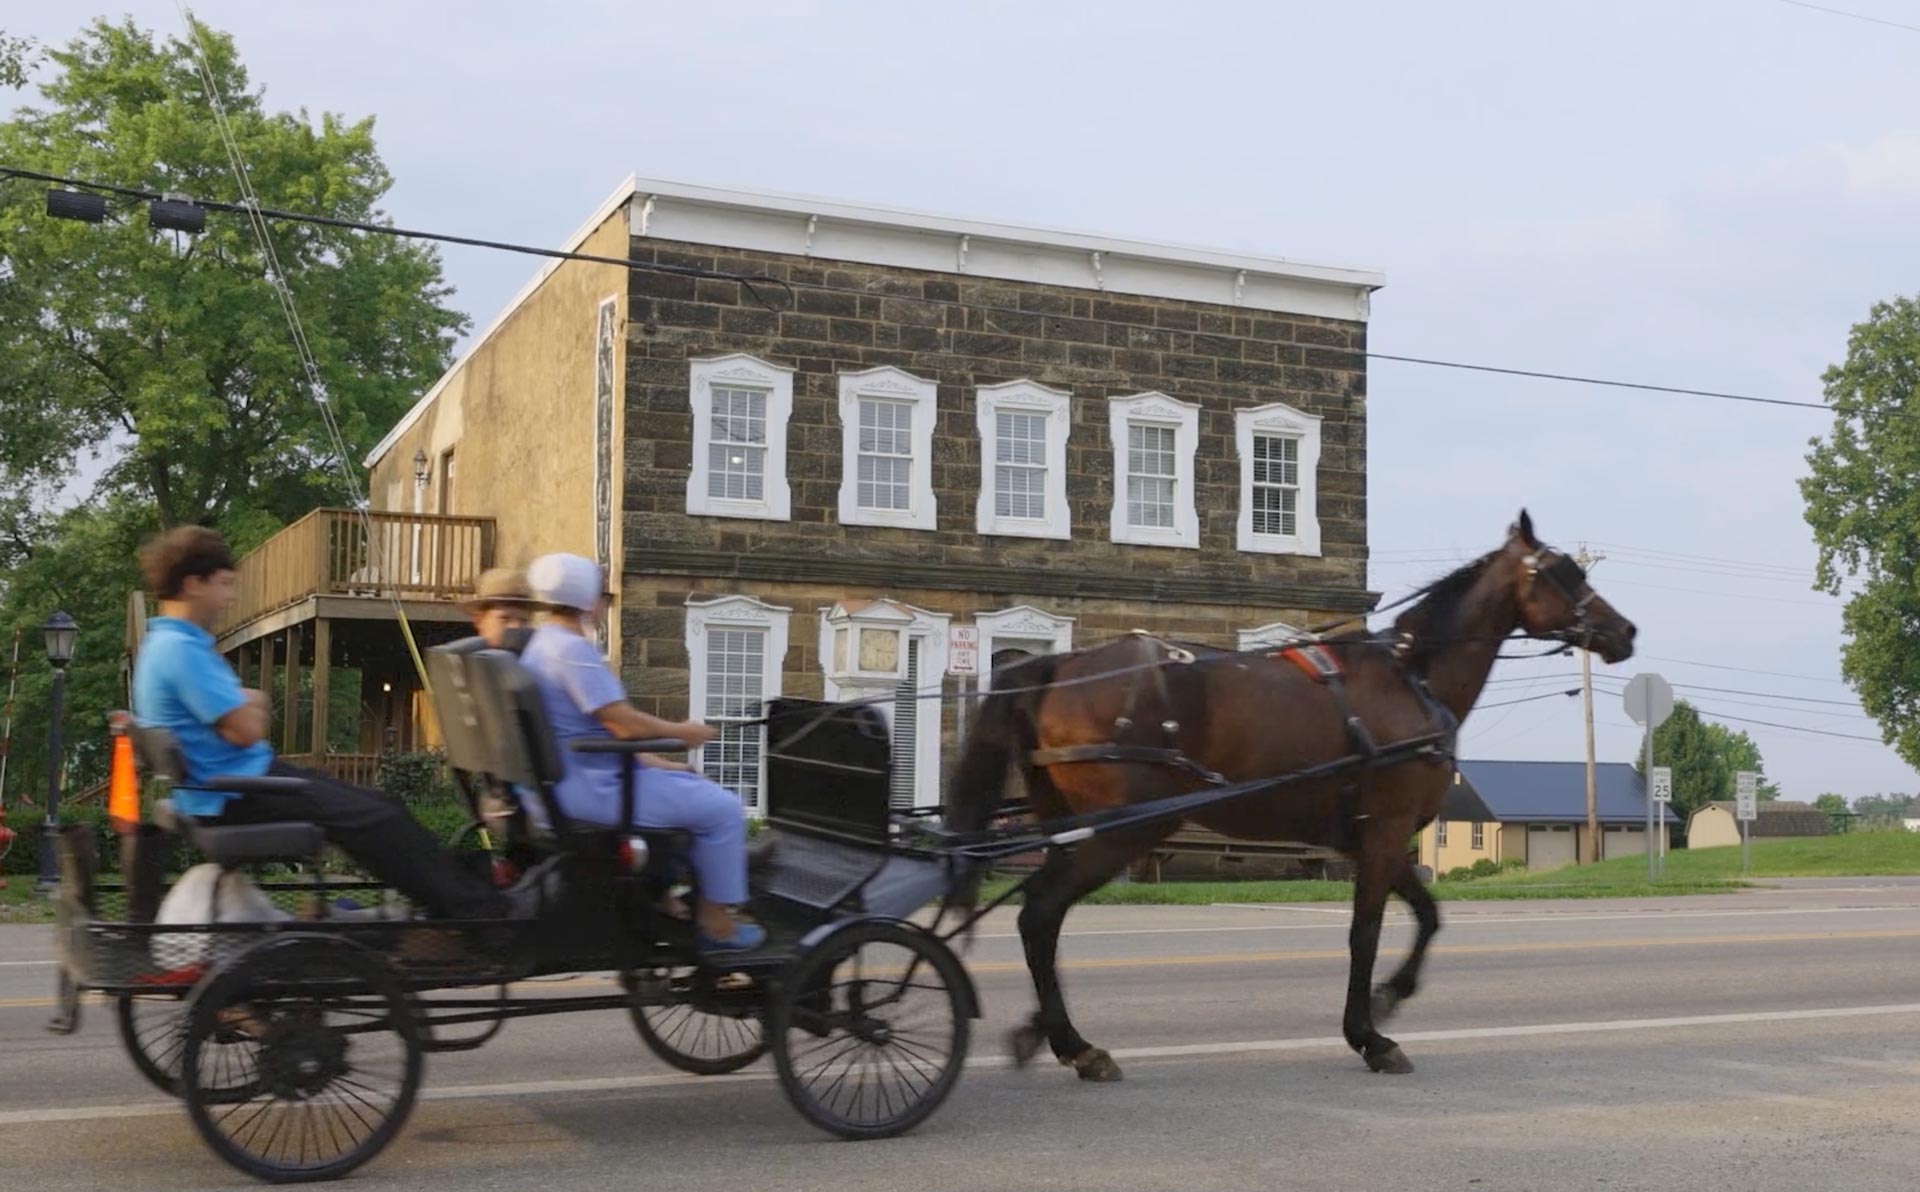 An Amish family on a horse and buggy rides by the Plain Values office in Winesburg, Ohio.